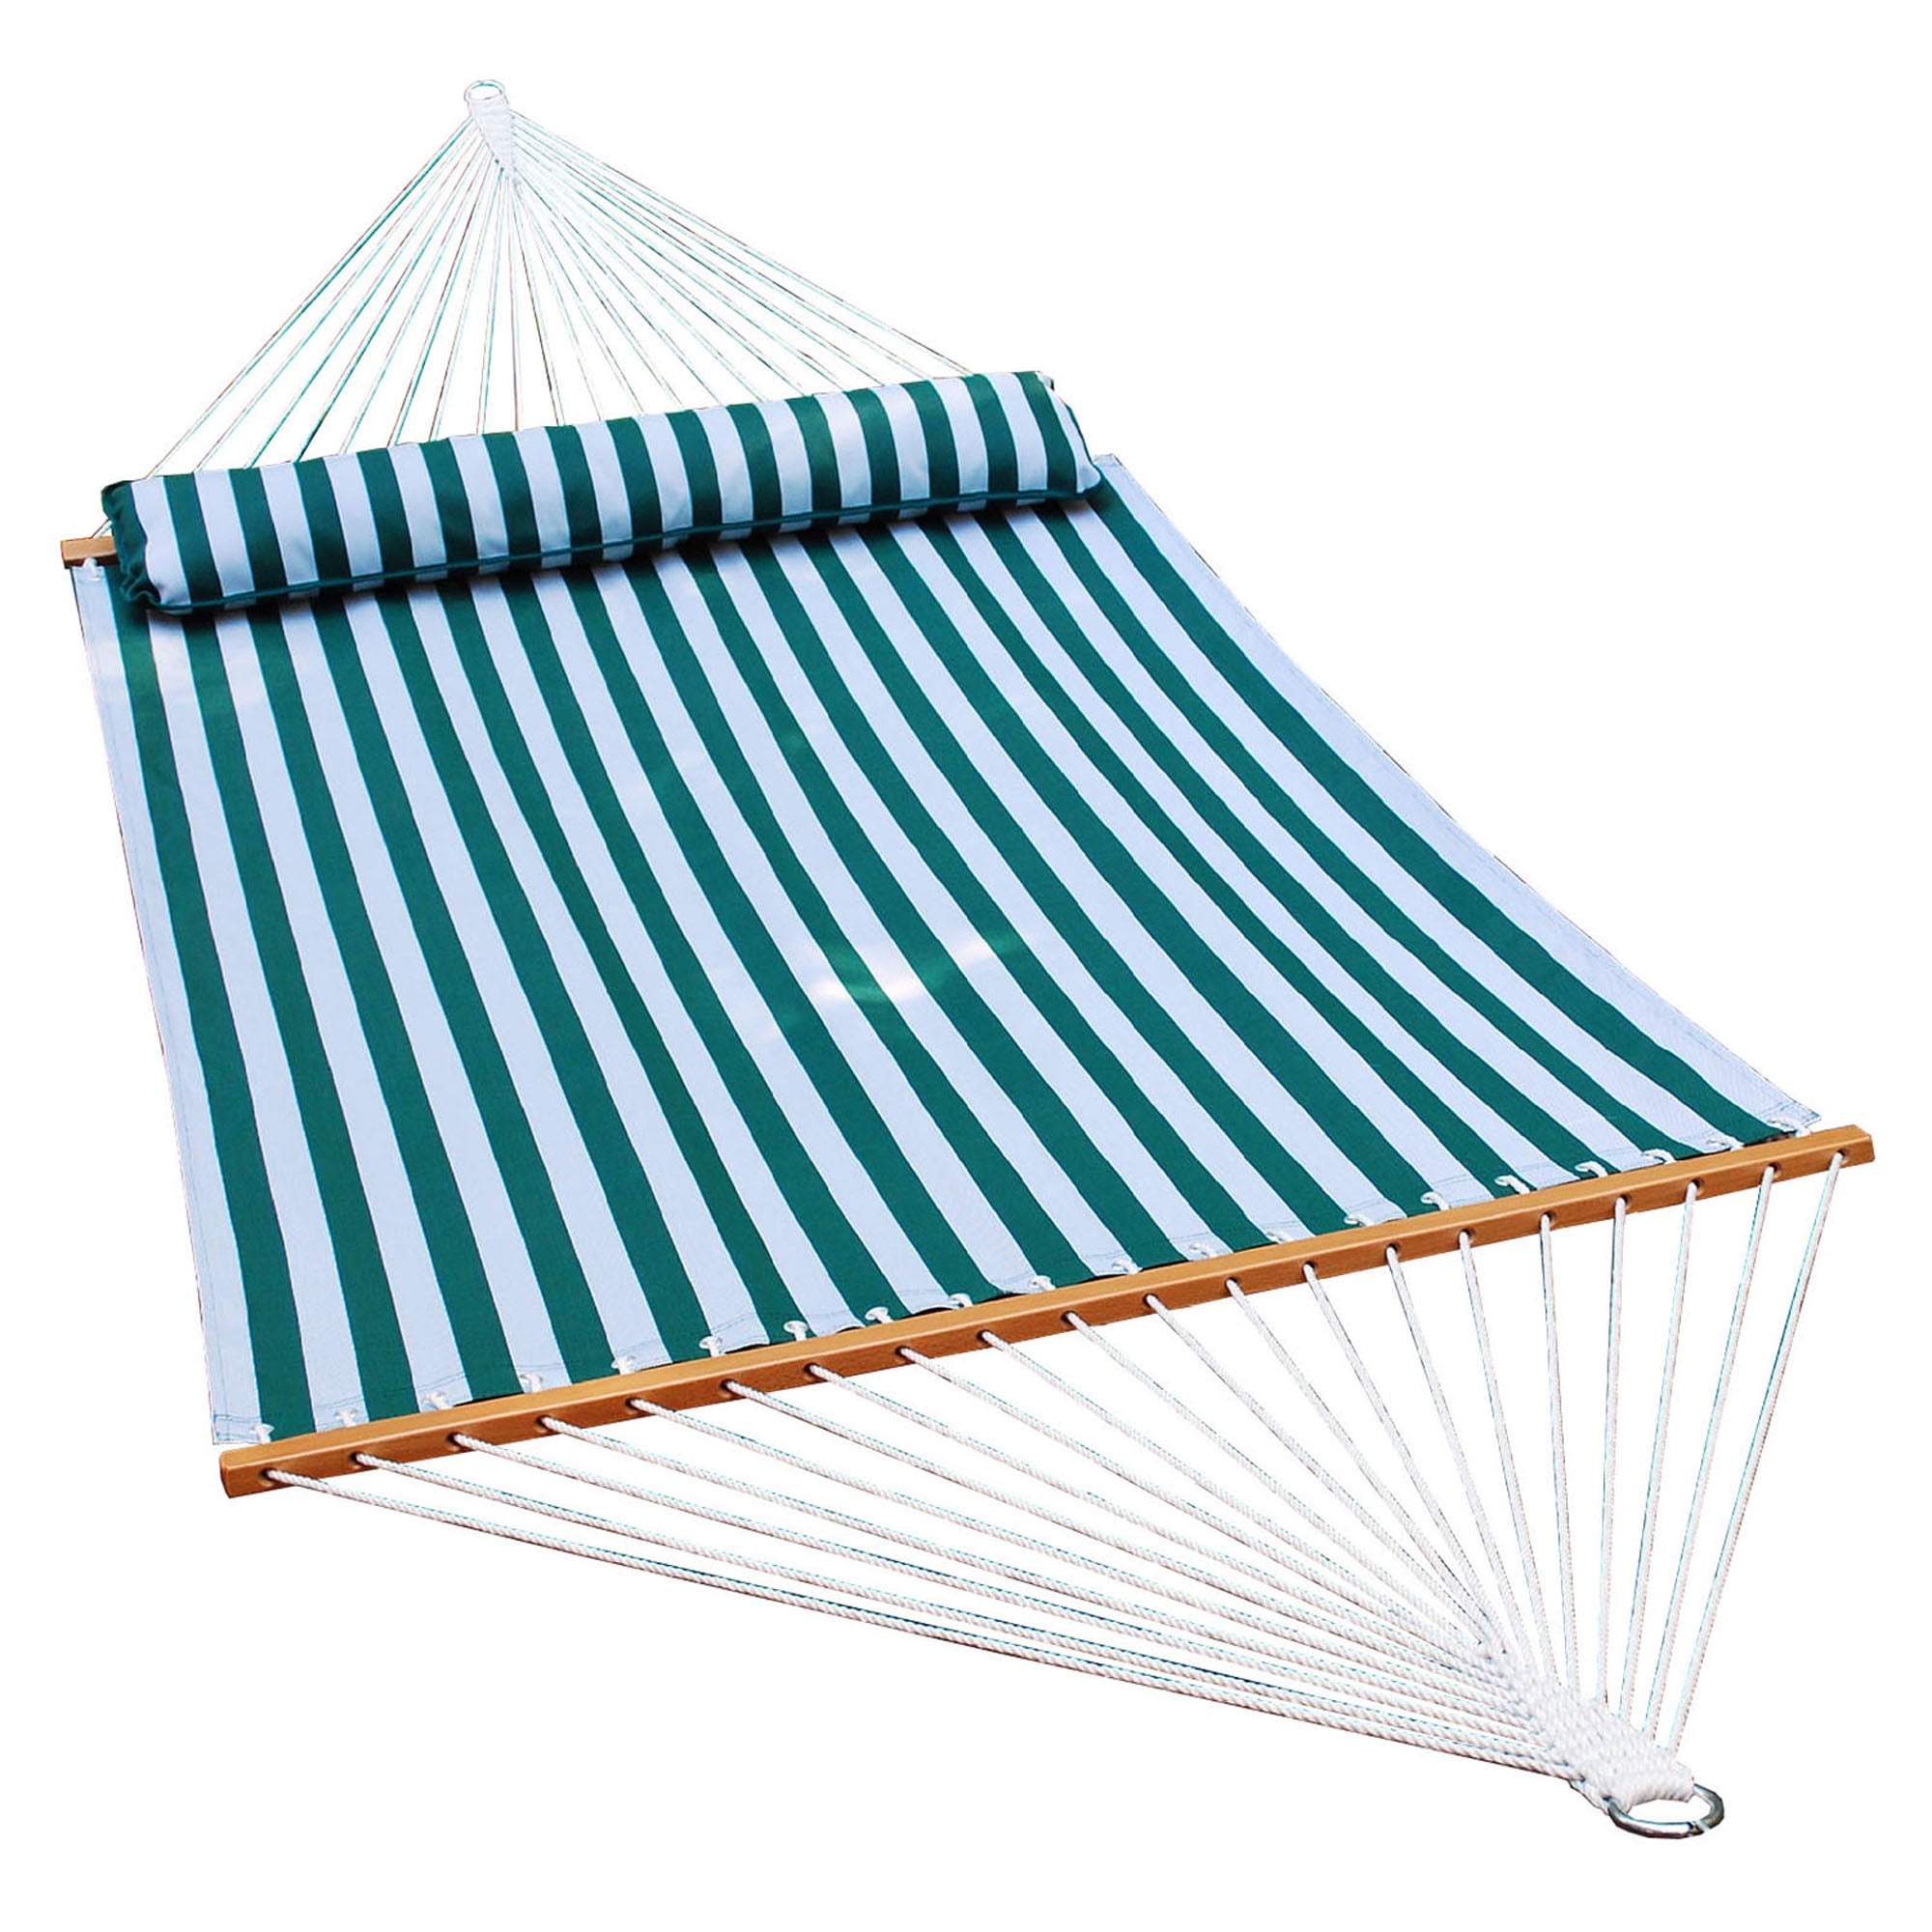 13' Quick Dry Hammock with Large Pillow - Green/White Stripe